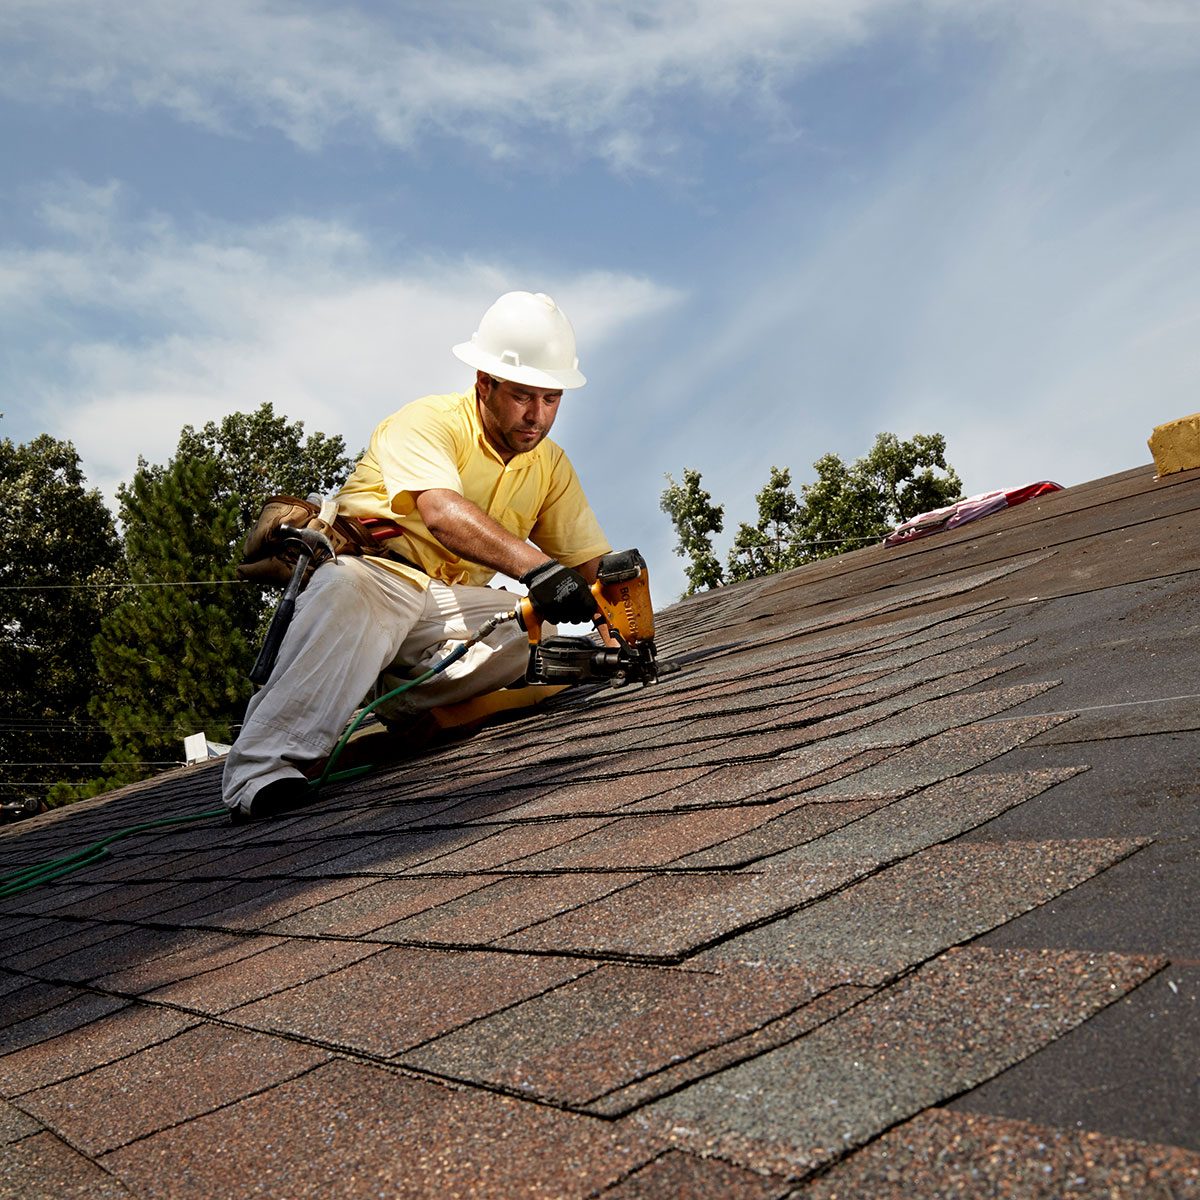 How to Find a Job As a Roofer